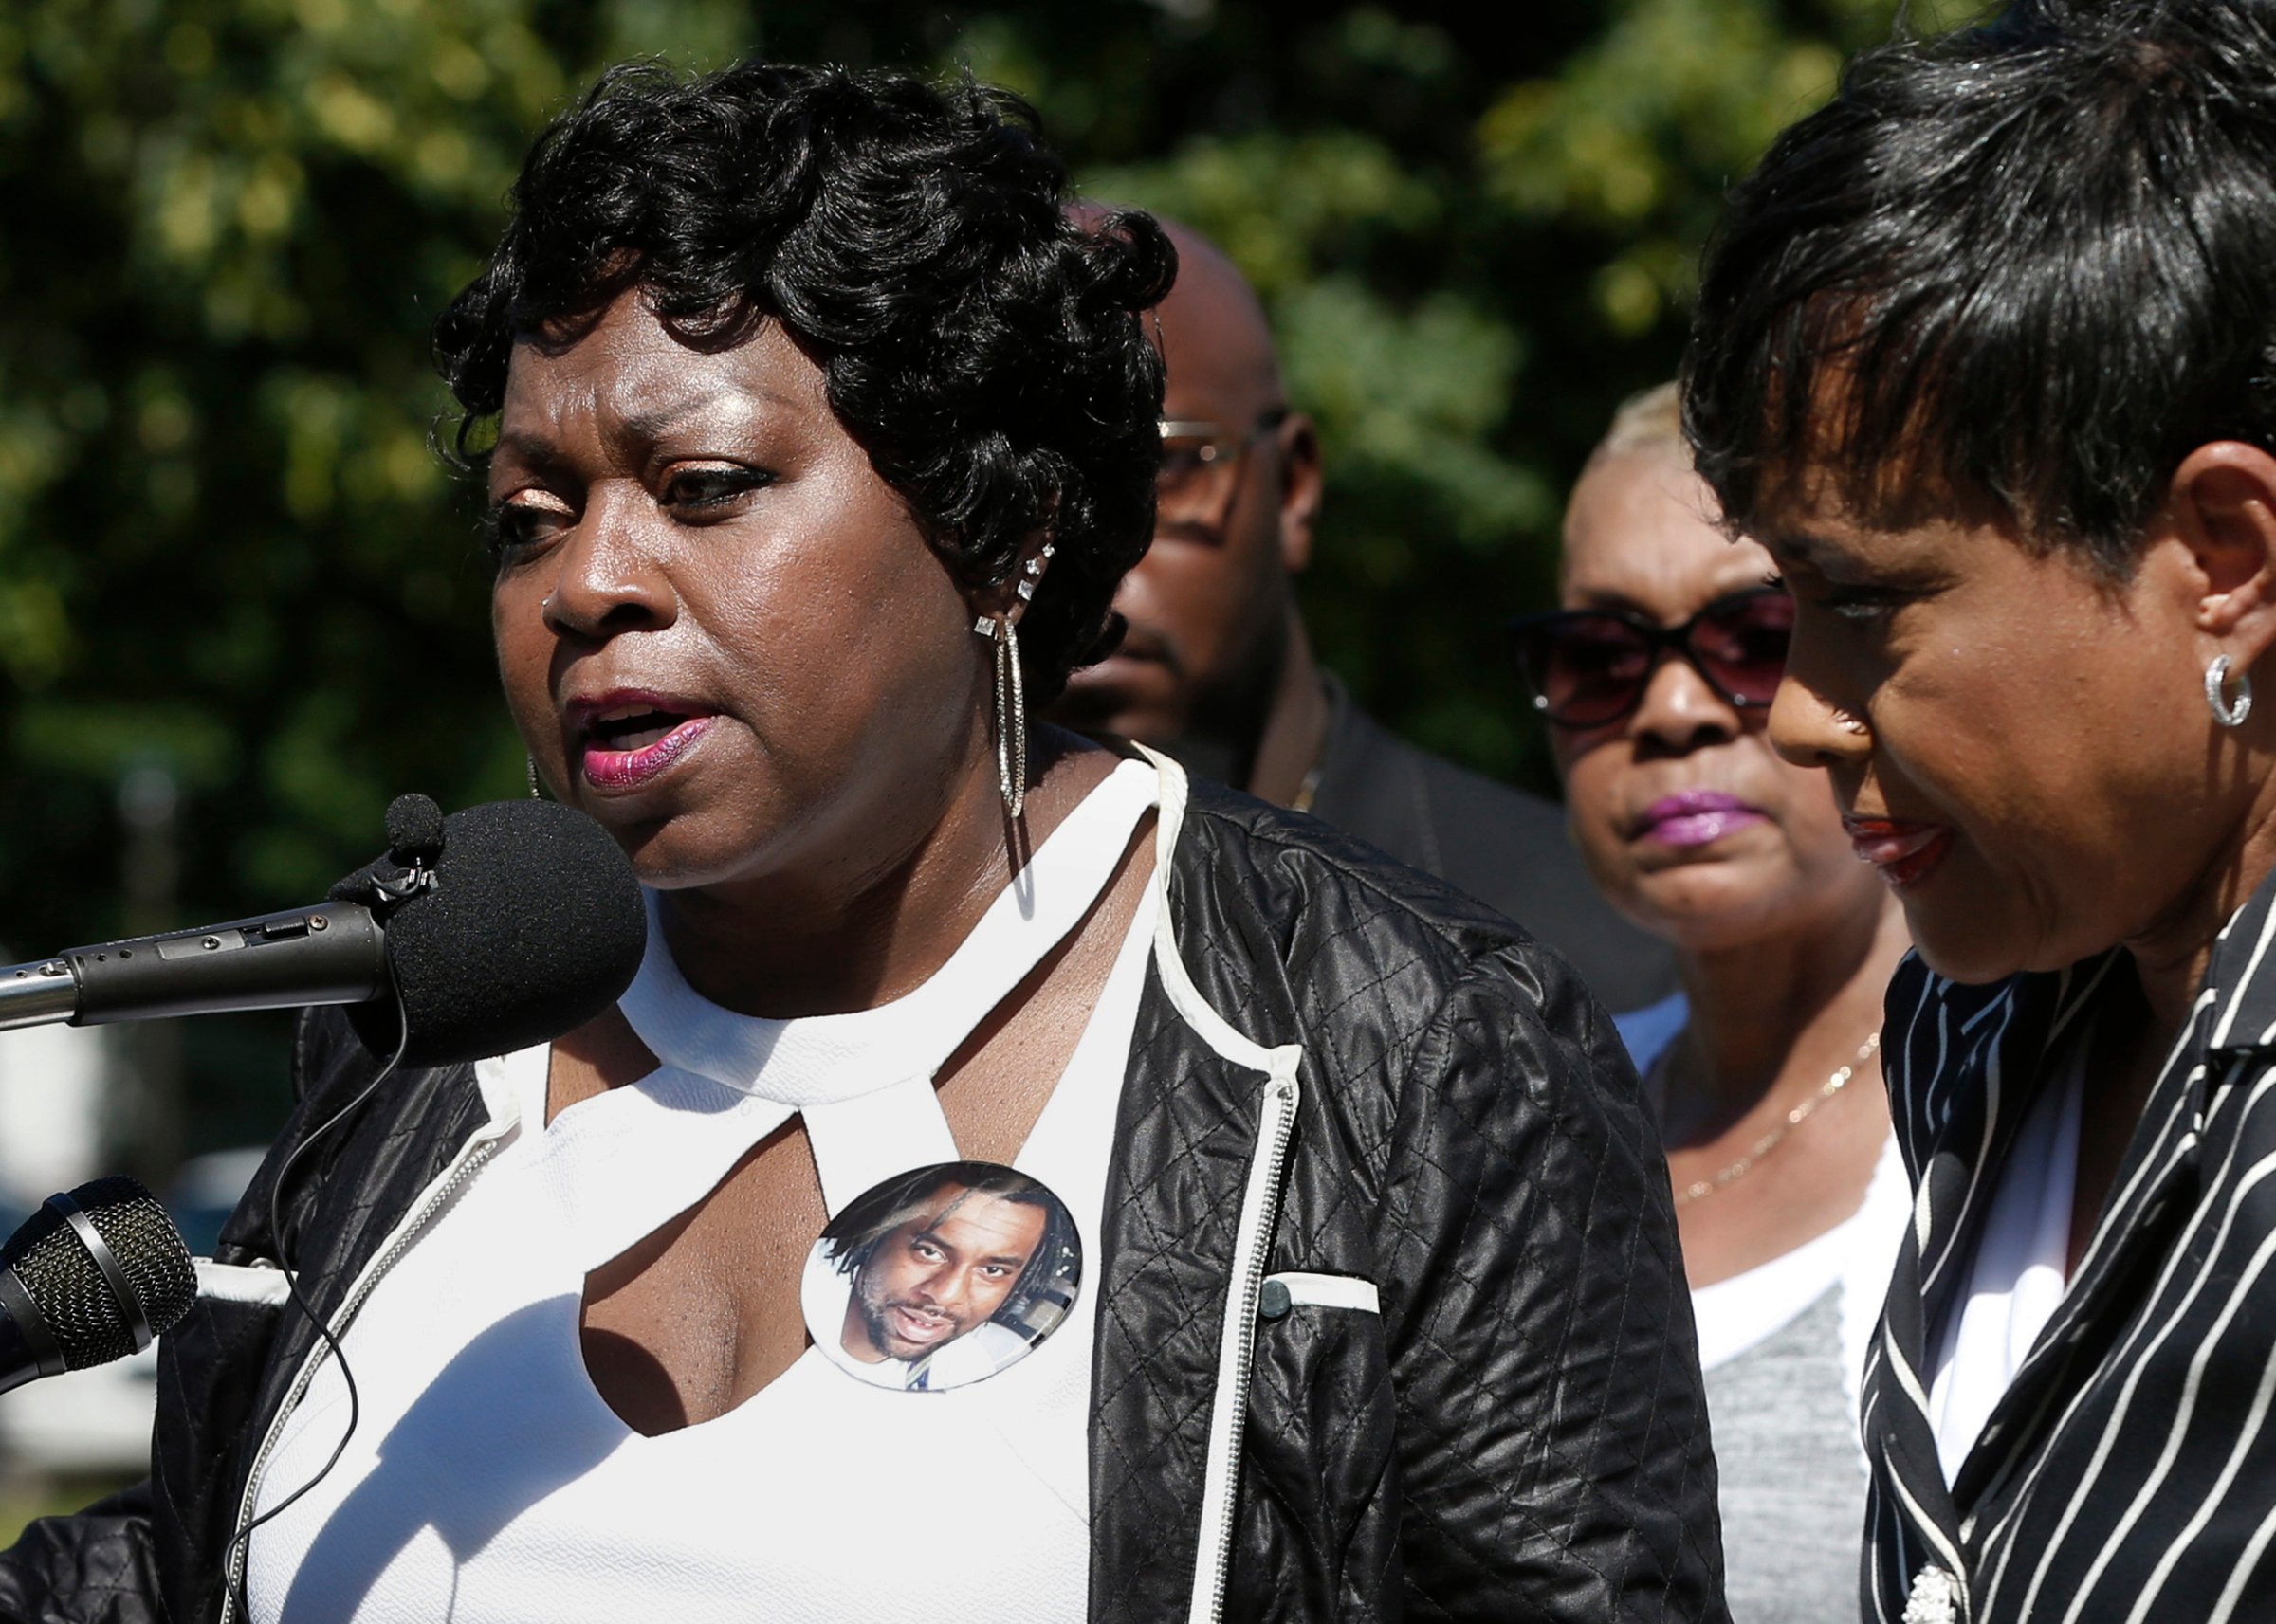 TV Judge Glenda Hatchett, right, listens as Valerie Castile, the mother of Philando Castile, takes questions during a news conference on the State Capitol grounds, in St. Paul, Minn, July 12, 2016.